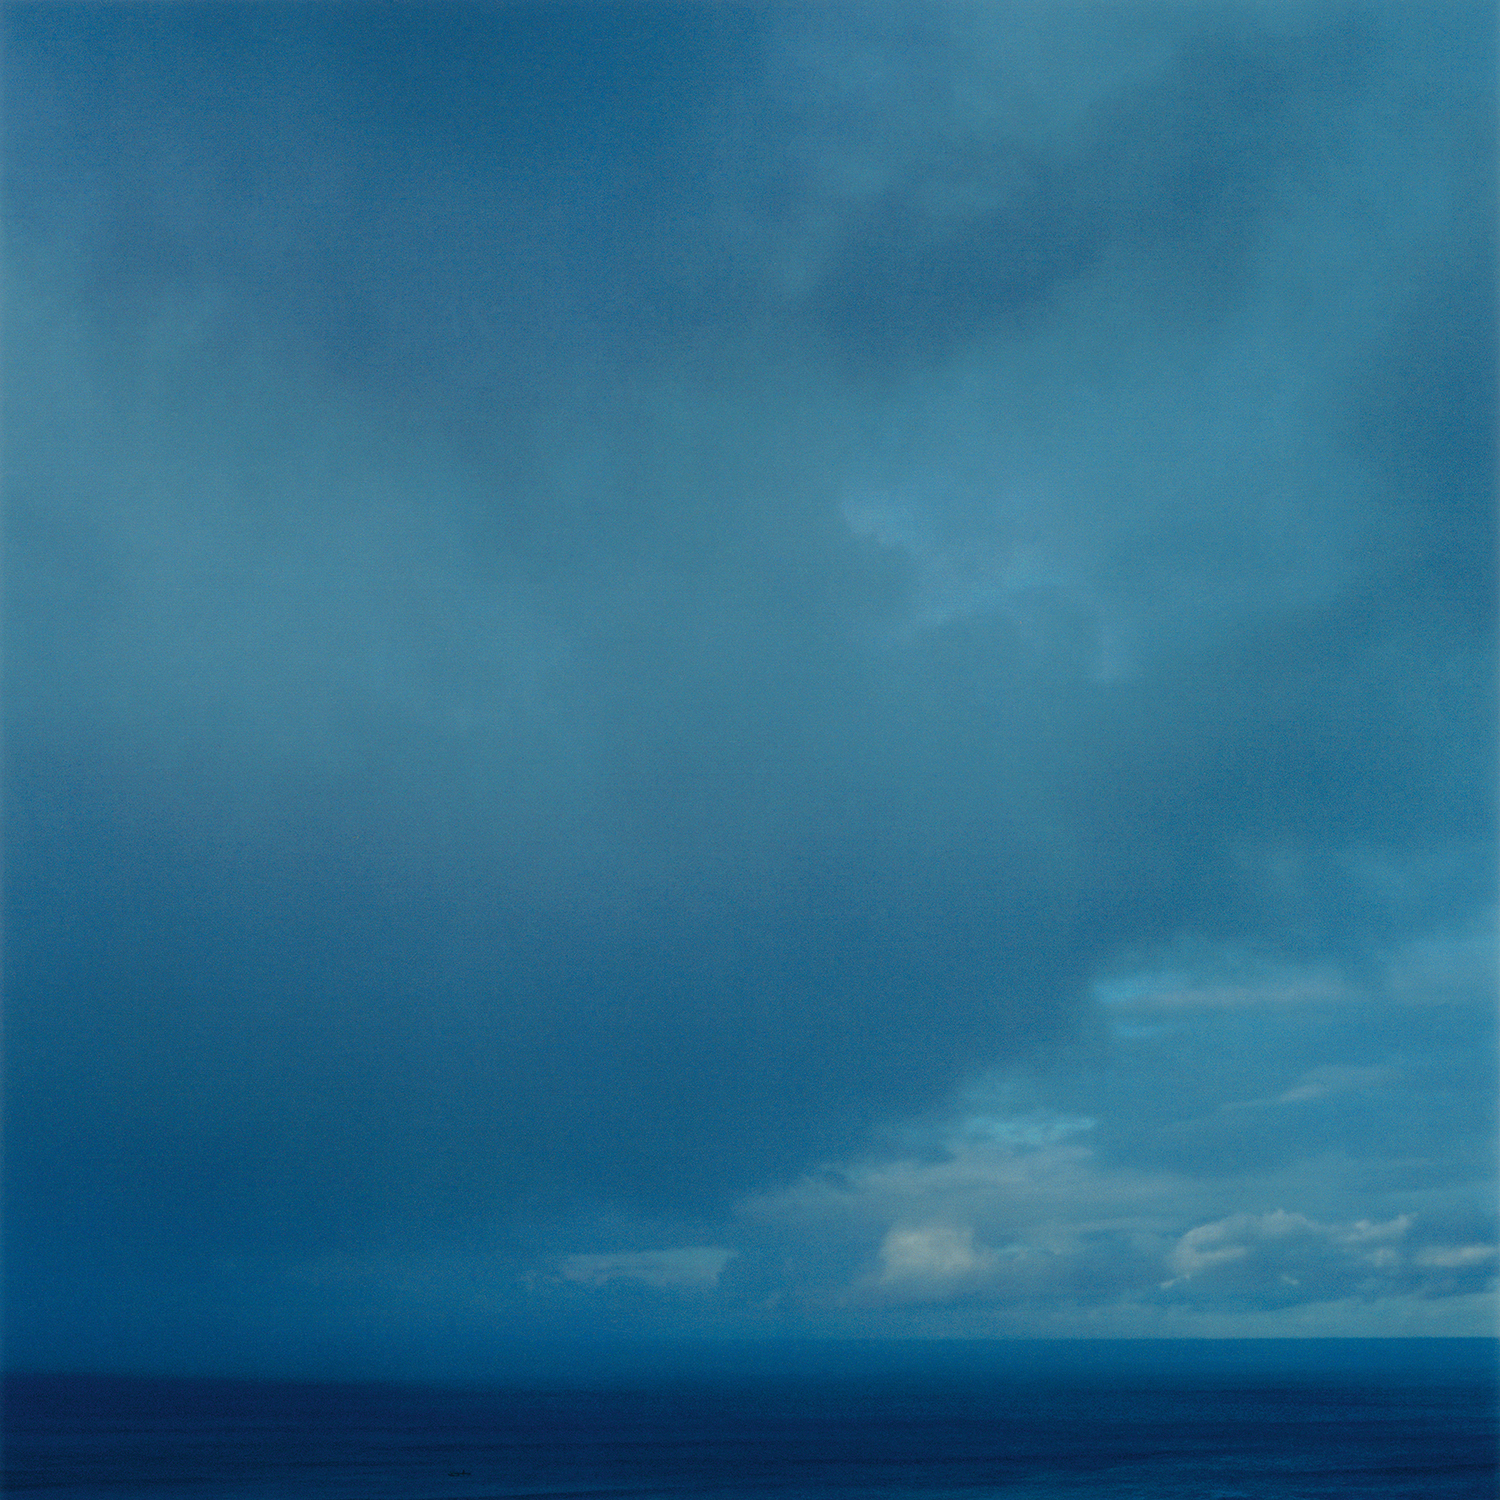 SQUALL, 2005